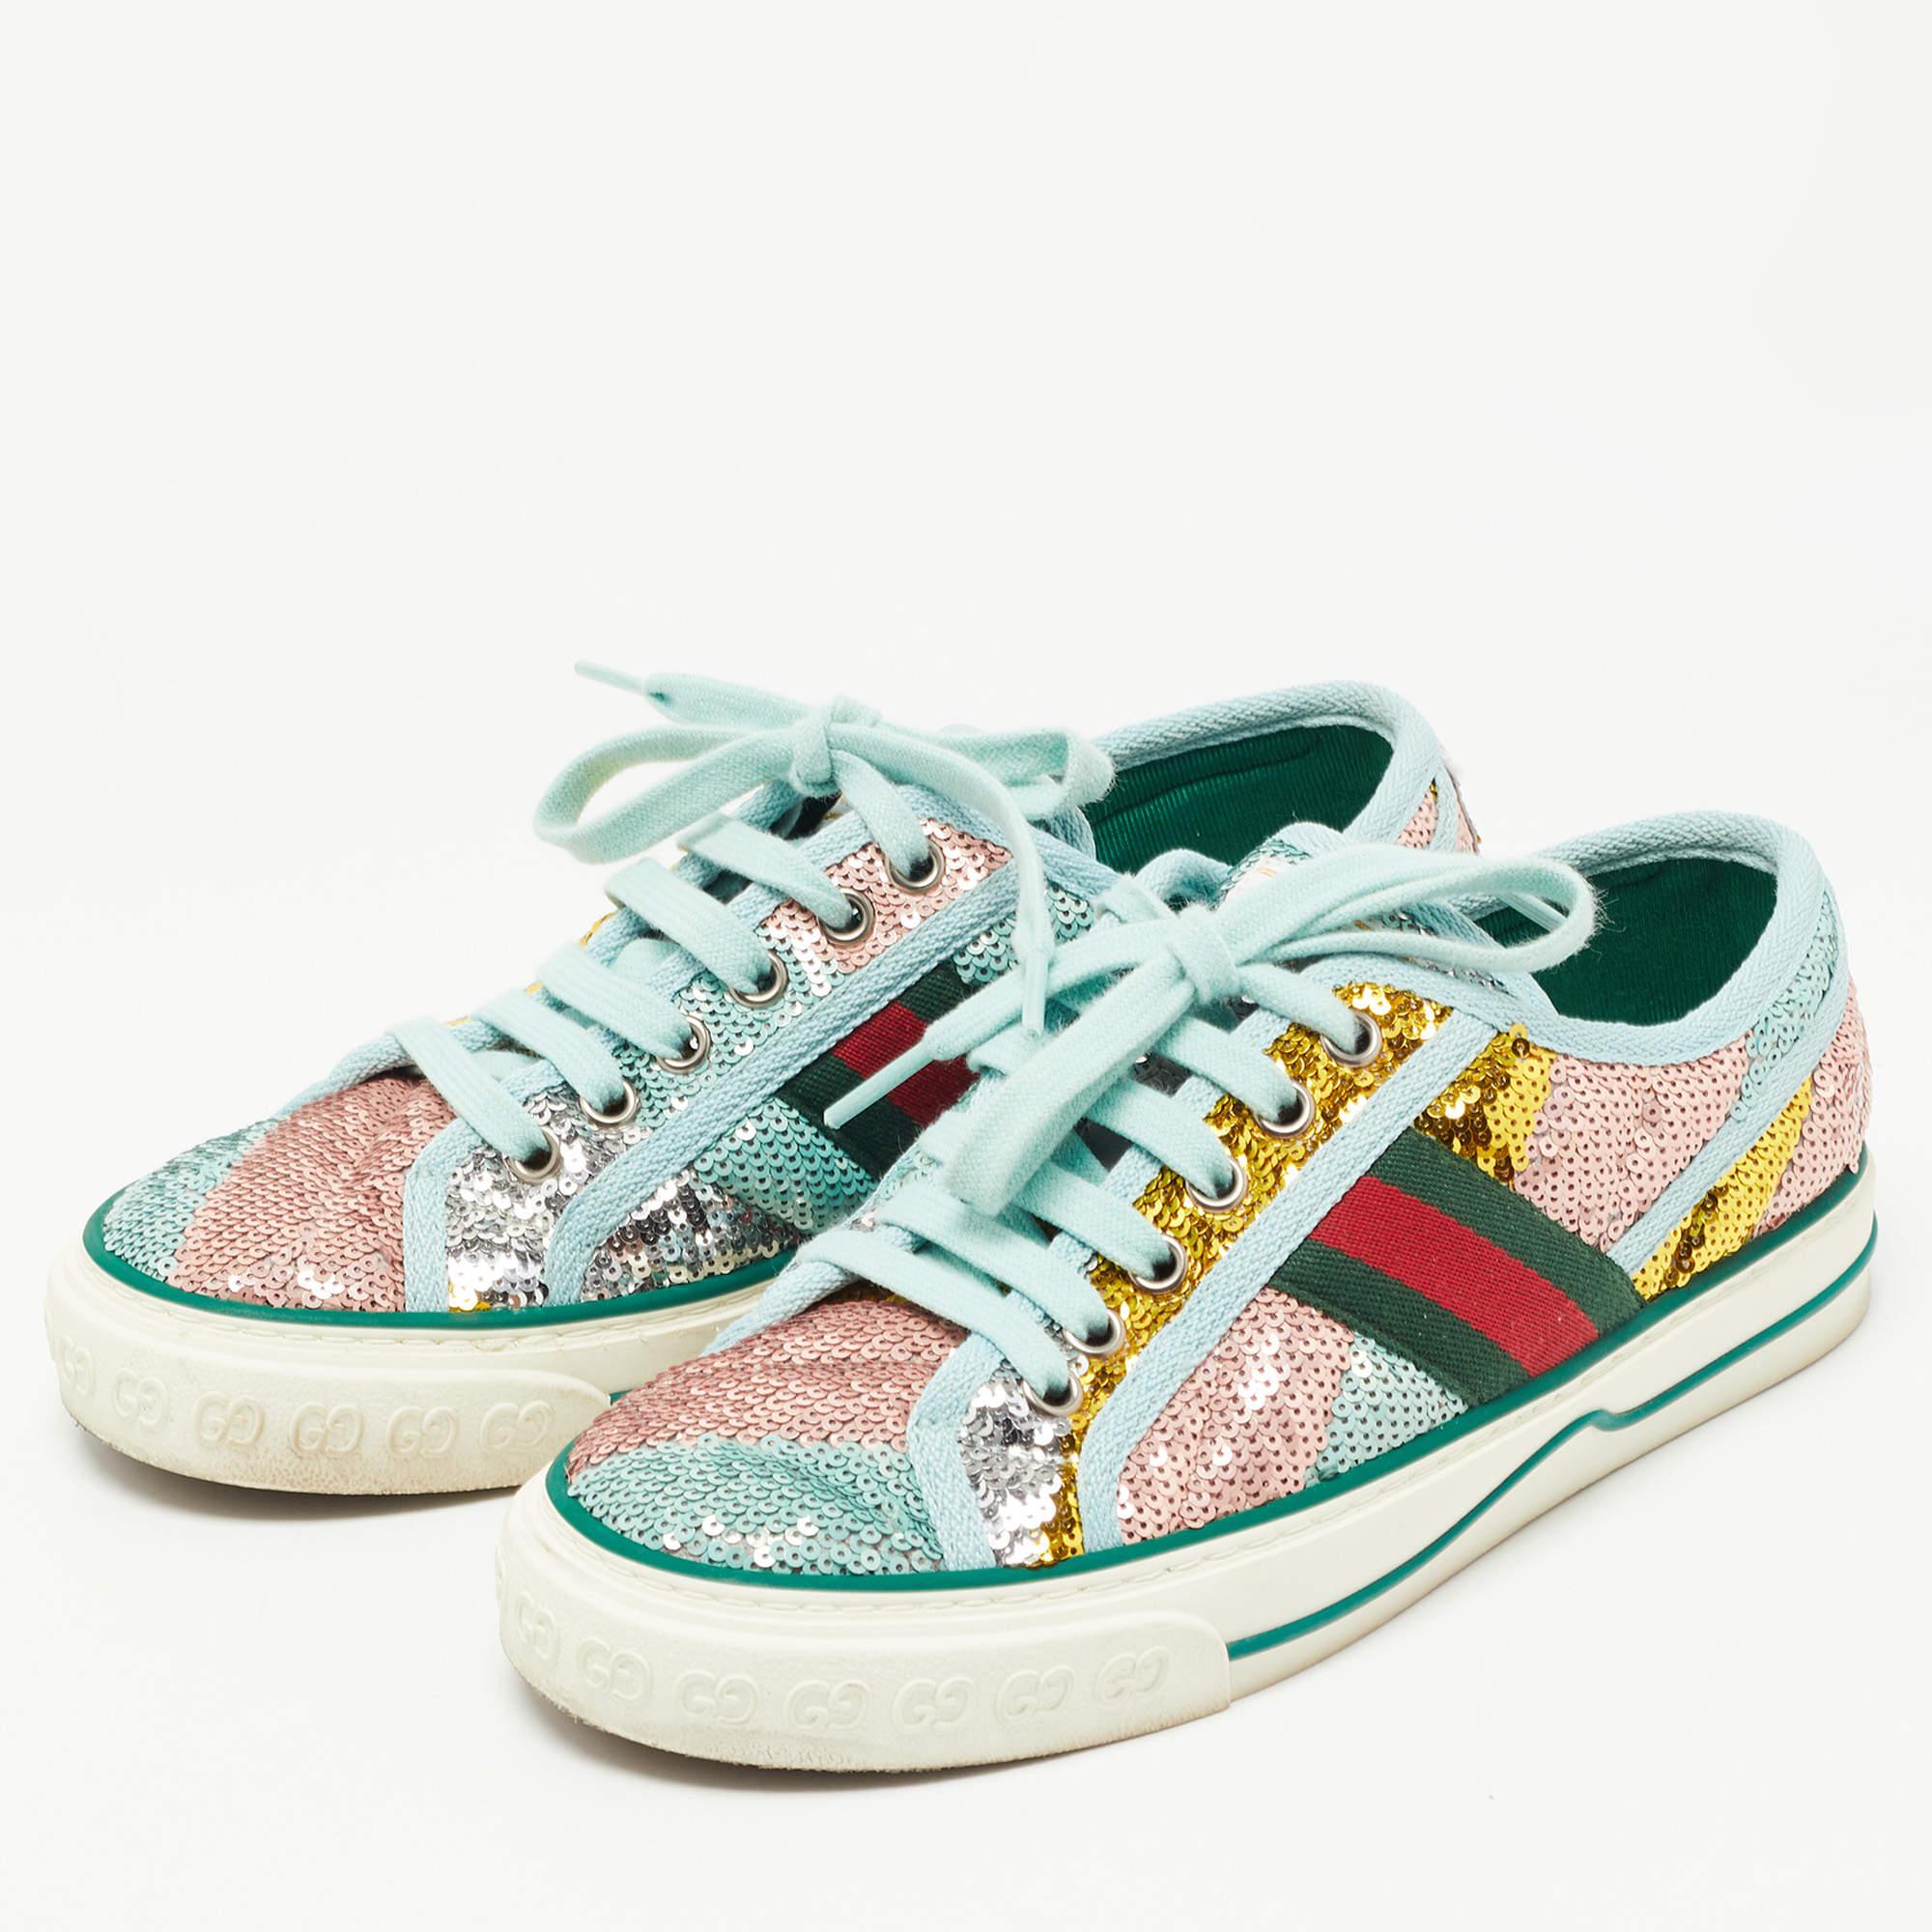 From one of the popular collections, these Gucci Tennis 1977 sneakers make for a desirable creation. they are created from canvas and sequin with lace-up vamps, comfortable insoles & durable soles.

Includes: Original Box, Original Dustbag, Info